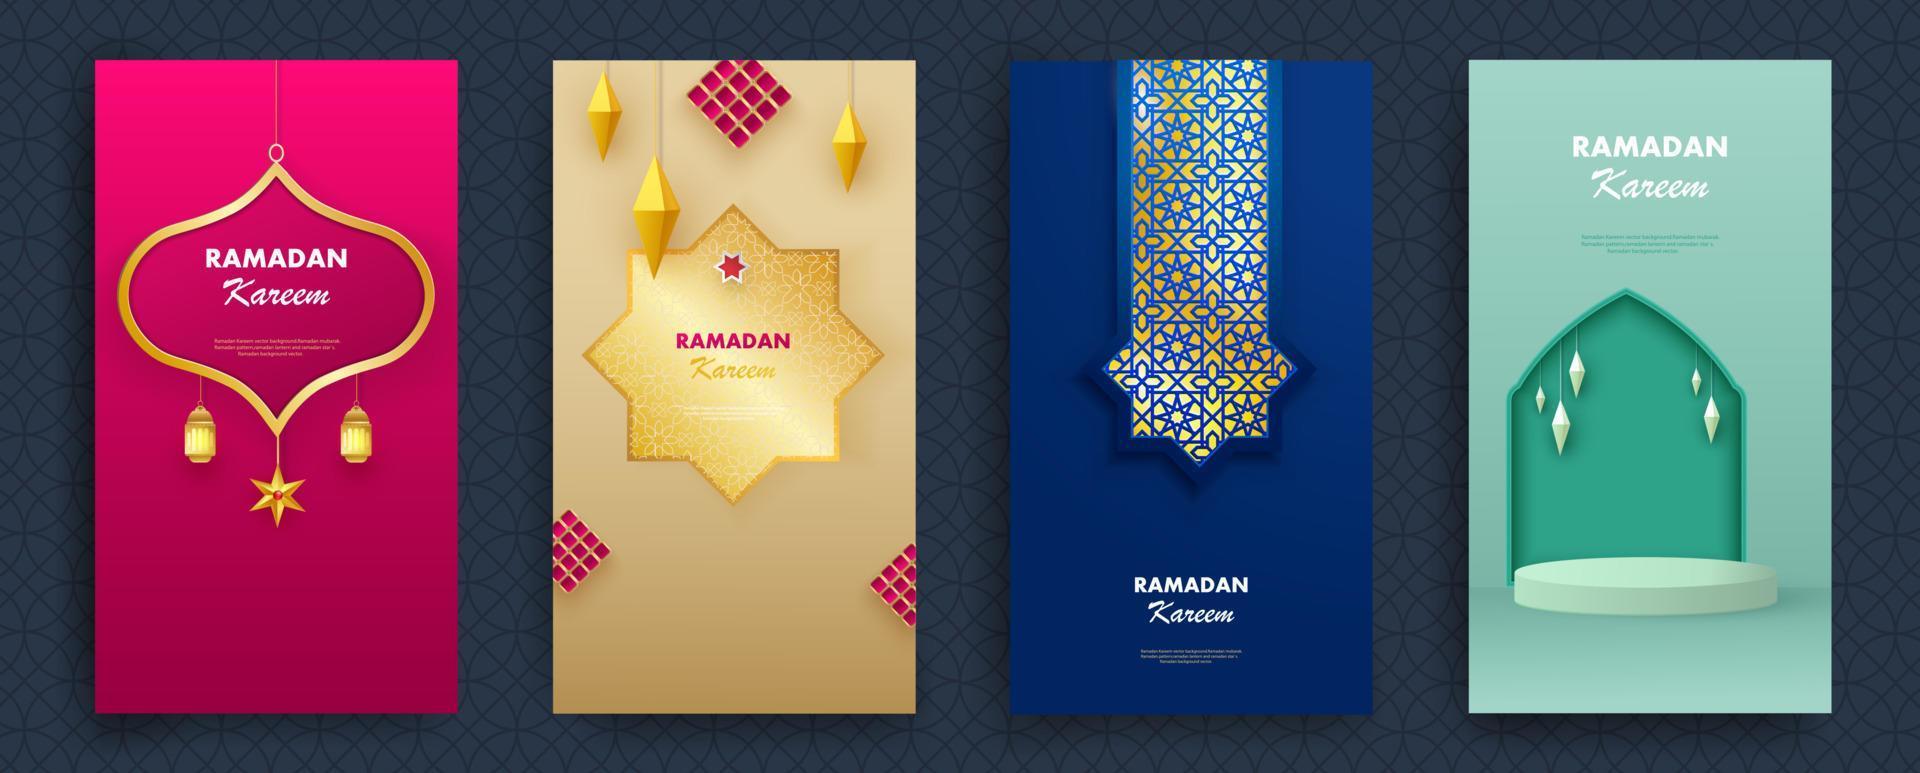 Ramadan Kareem set of posters or invitations with 3d paper cut islamic lanterns, stars and moon on blue and light background. Vector